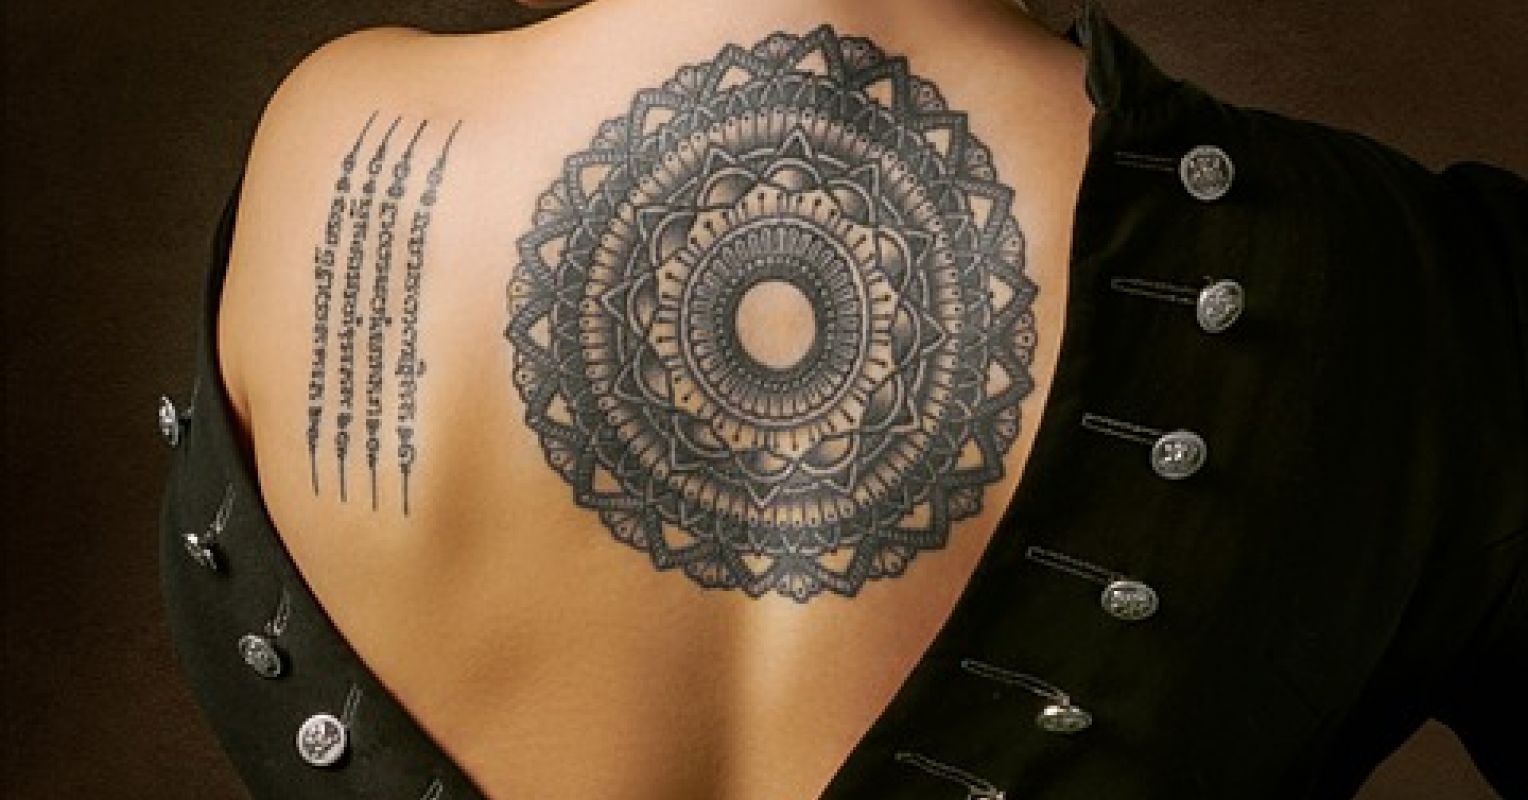 Women and Tattoos Fashion Meaning and Implications for Health  Farley   2019  Journal of Midwifery  Womens Health  Wiley Online Library